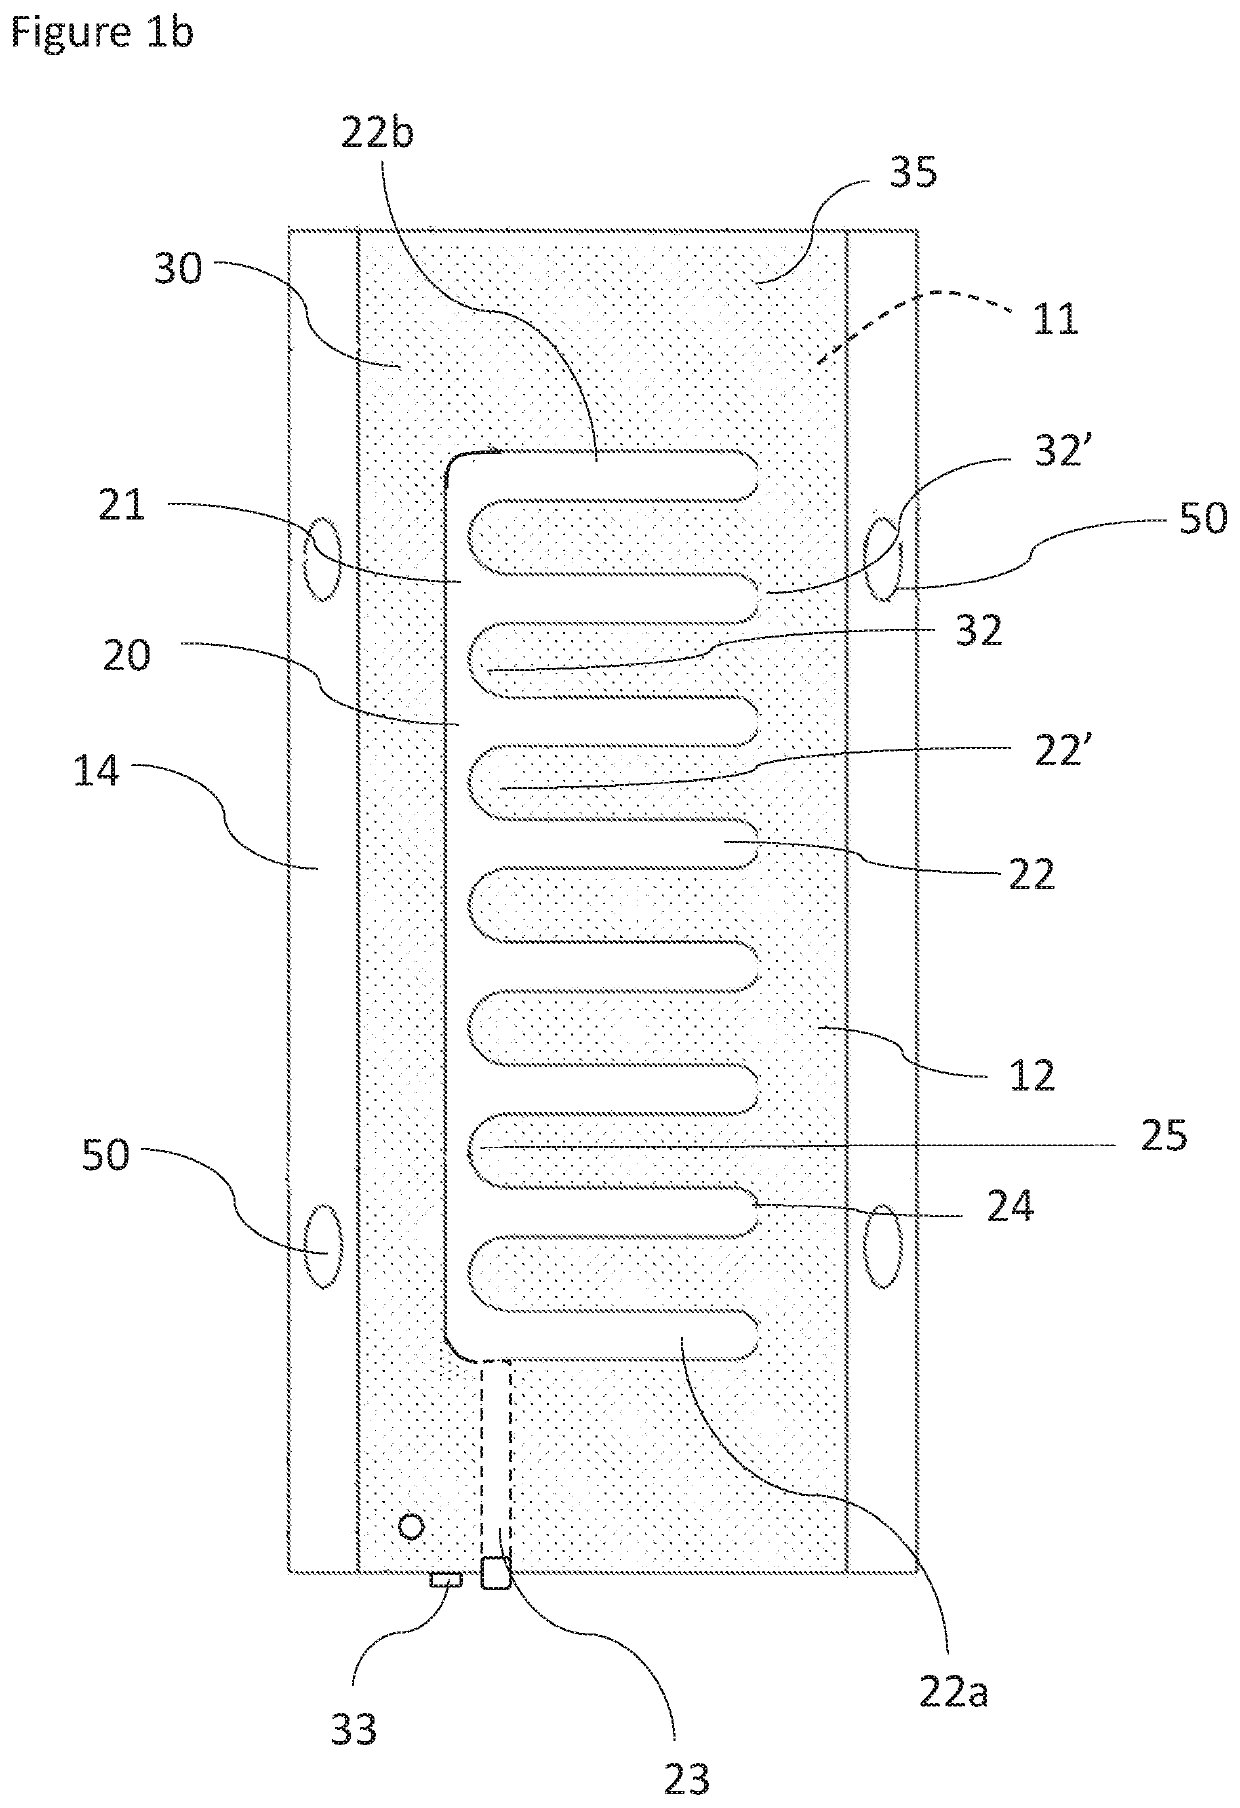 Patient lifter having interlocking design with intraoperative controlled temperature air delivery system